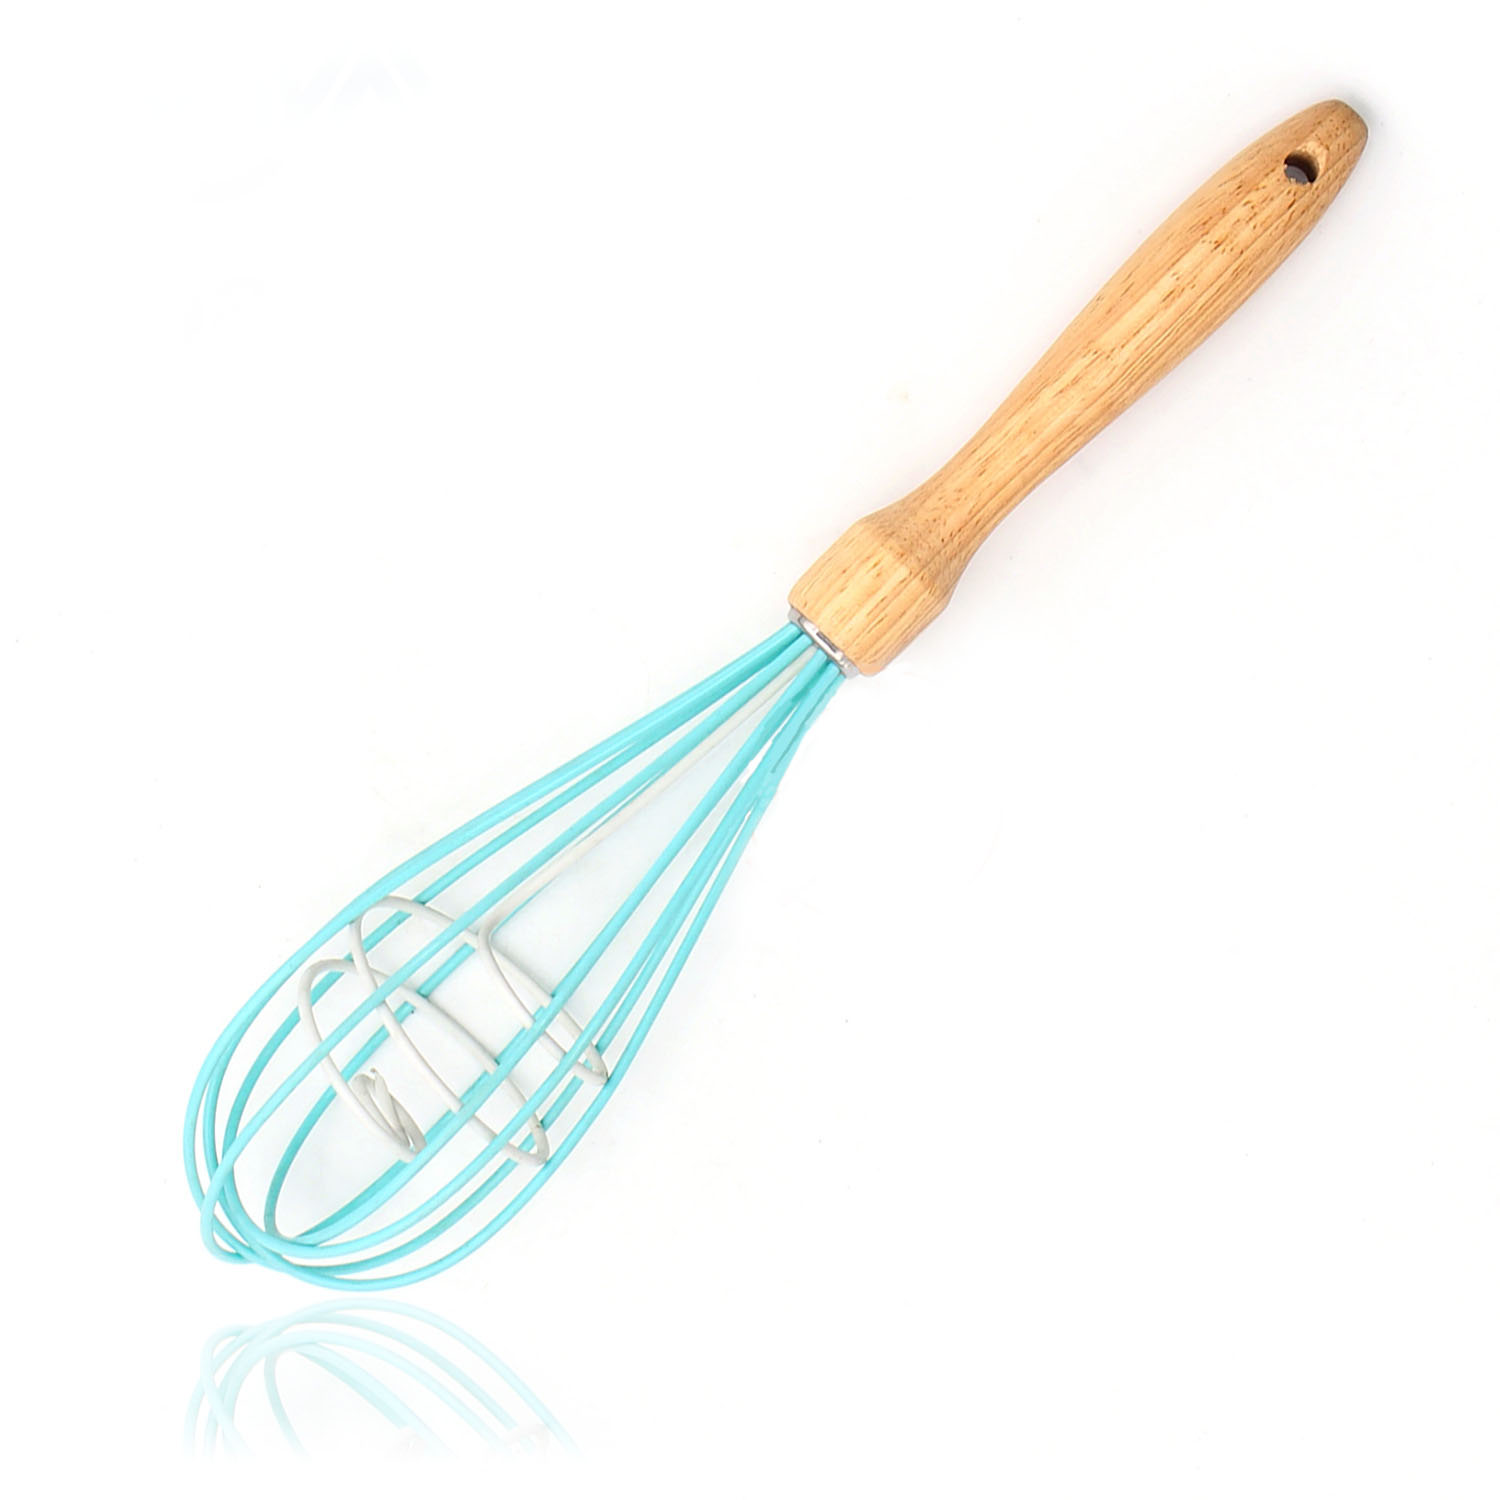 Stainless steel silicone tube egg beater kitchen manual egg wire whisk